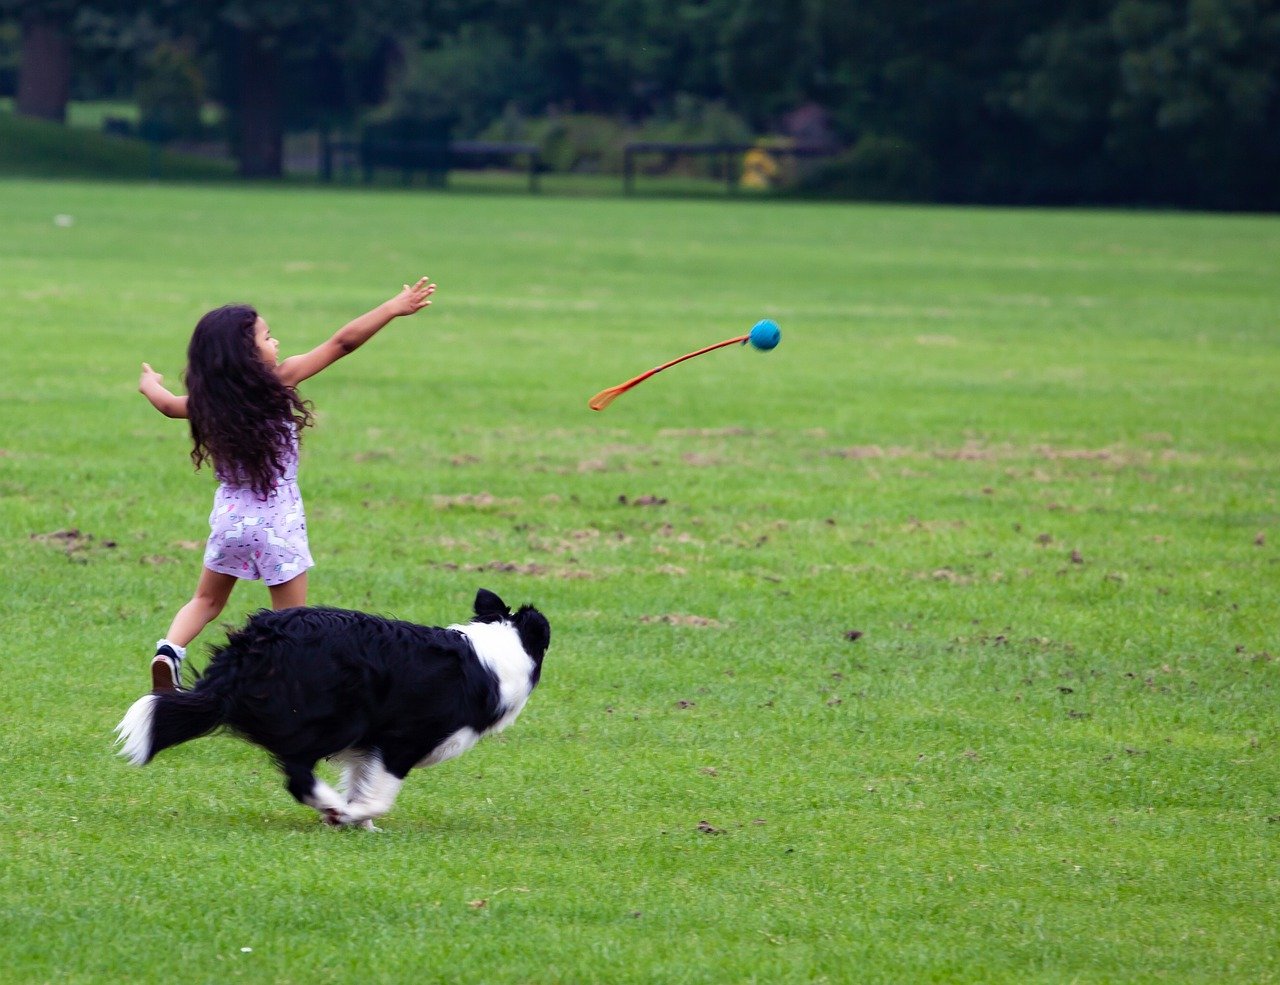 a girl chasing a ball with a stick